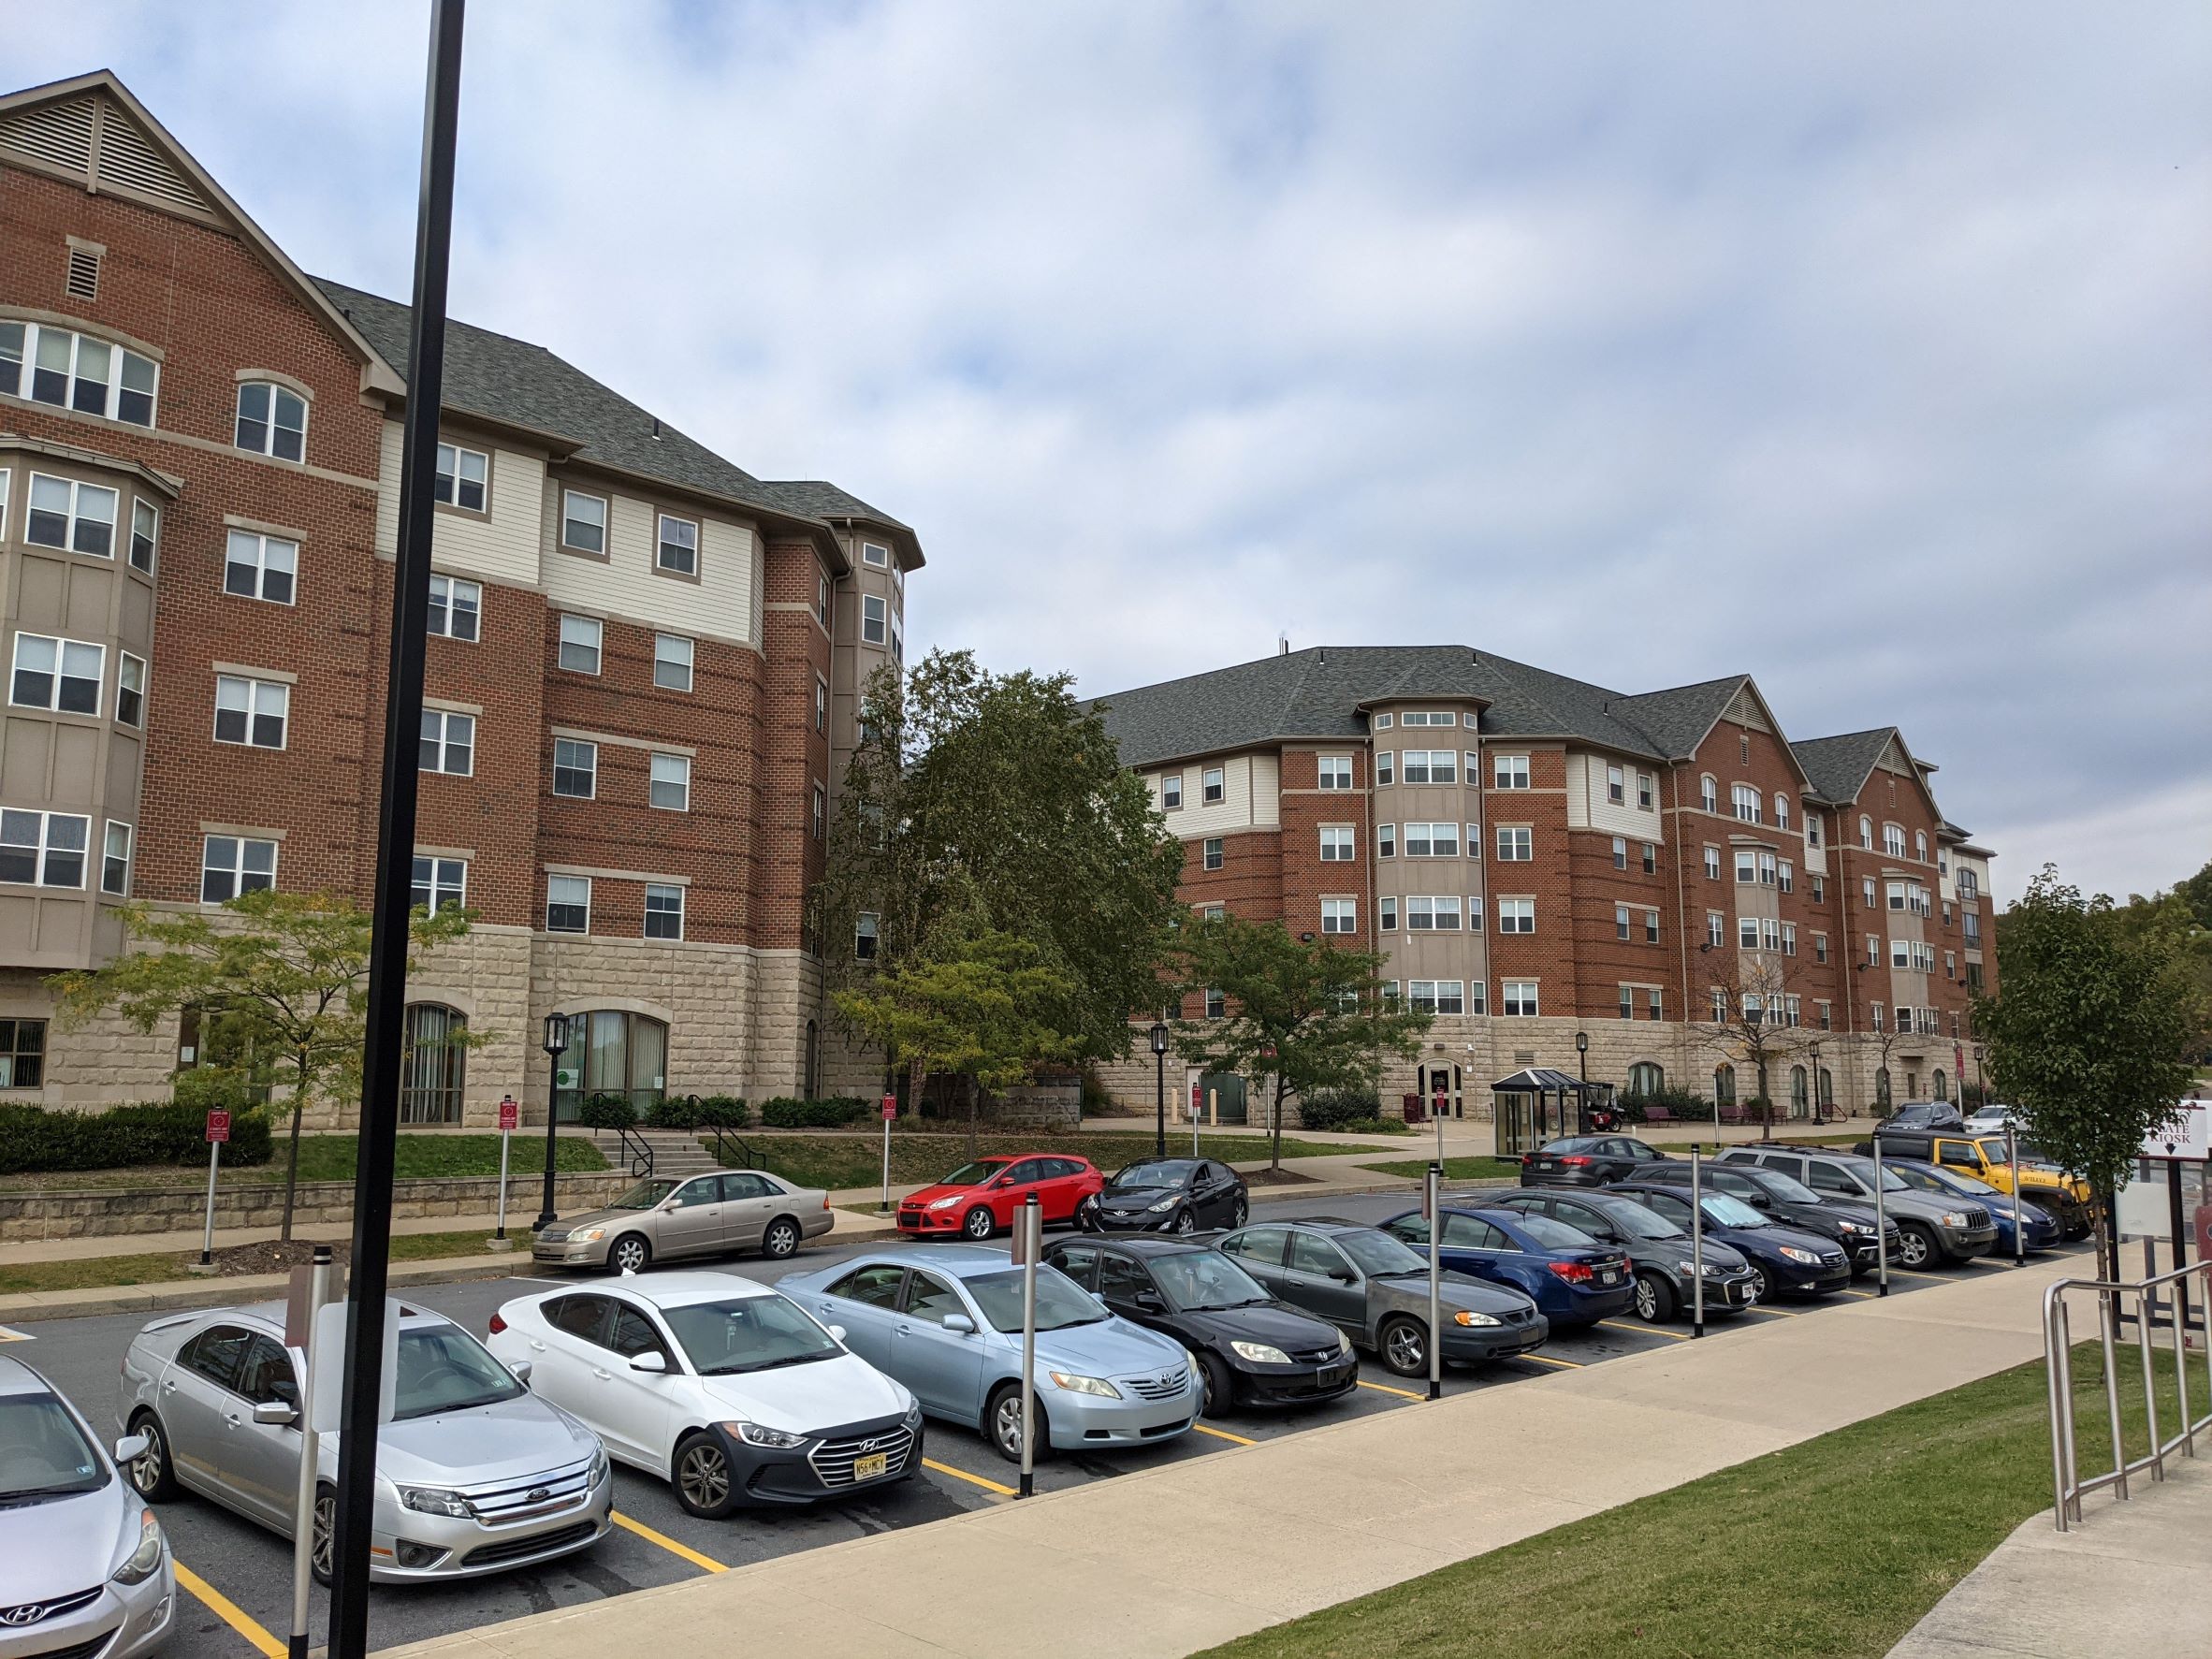 Traditional looking five story red brick  living learning student housing community dormitory building with clapboard siding and large gables and a large stone base with storefront windows in it along a busy road with many cars parked